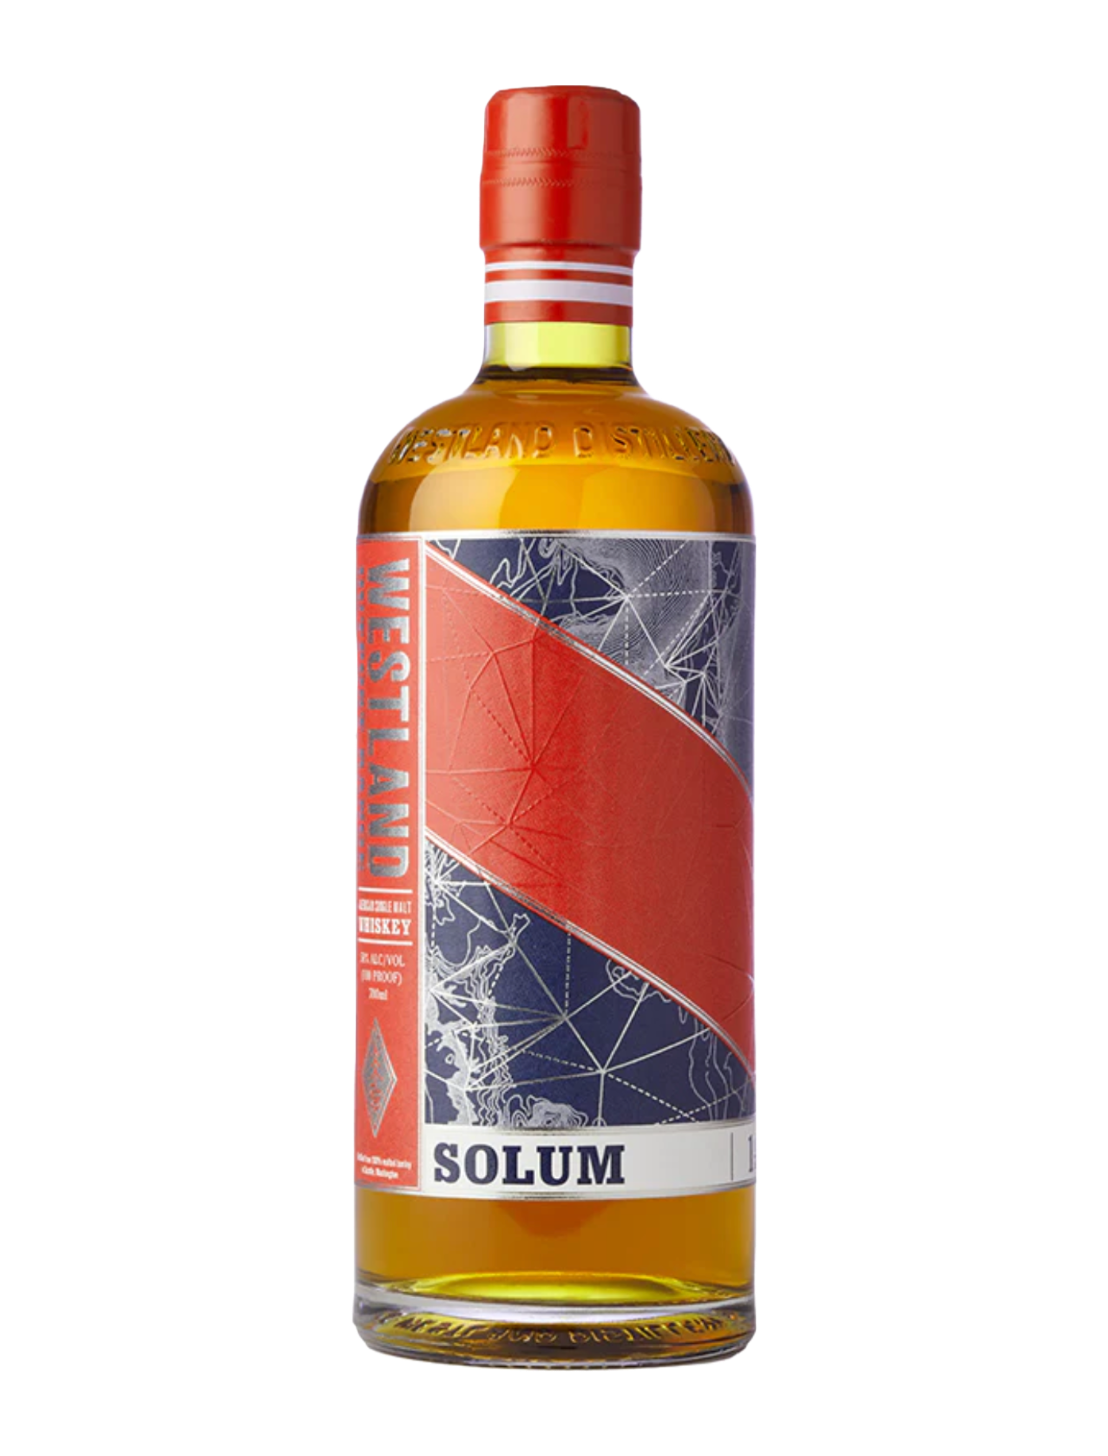 An elegant bottle of Westland Distillery Solum Edition 1 in front of a plain white background